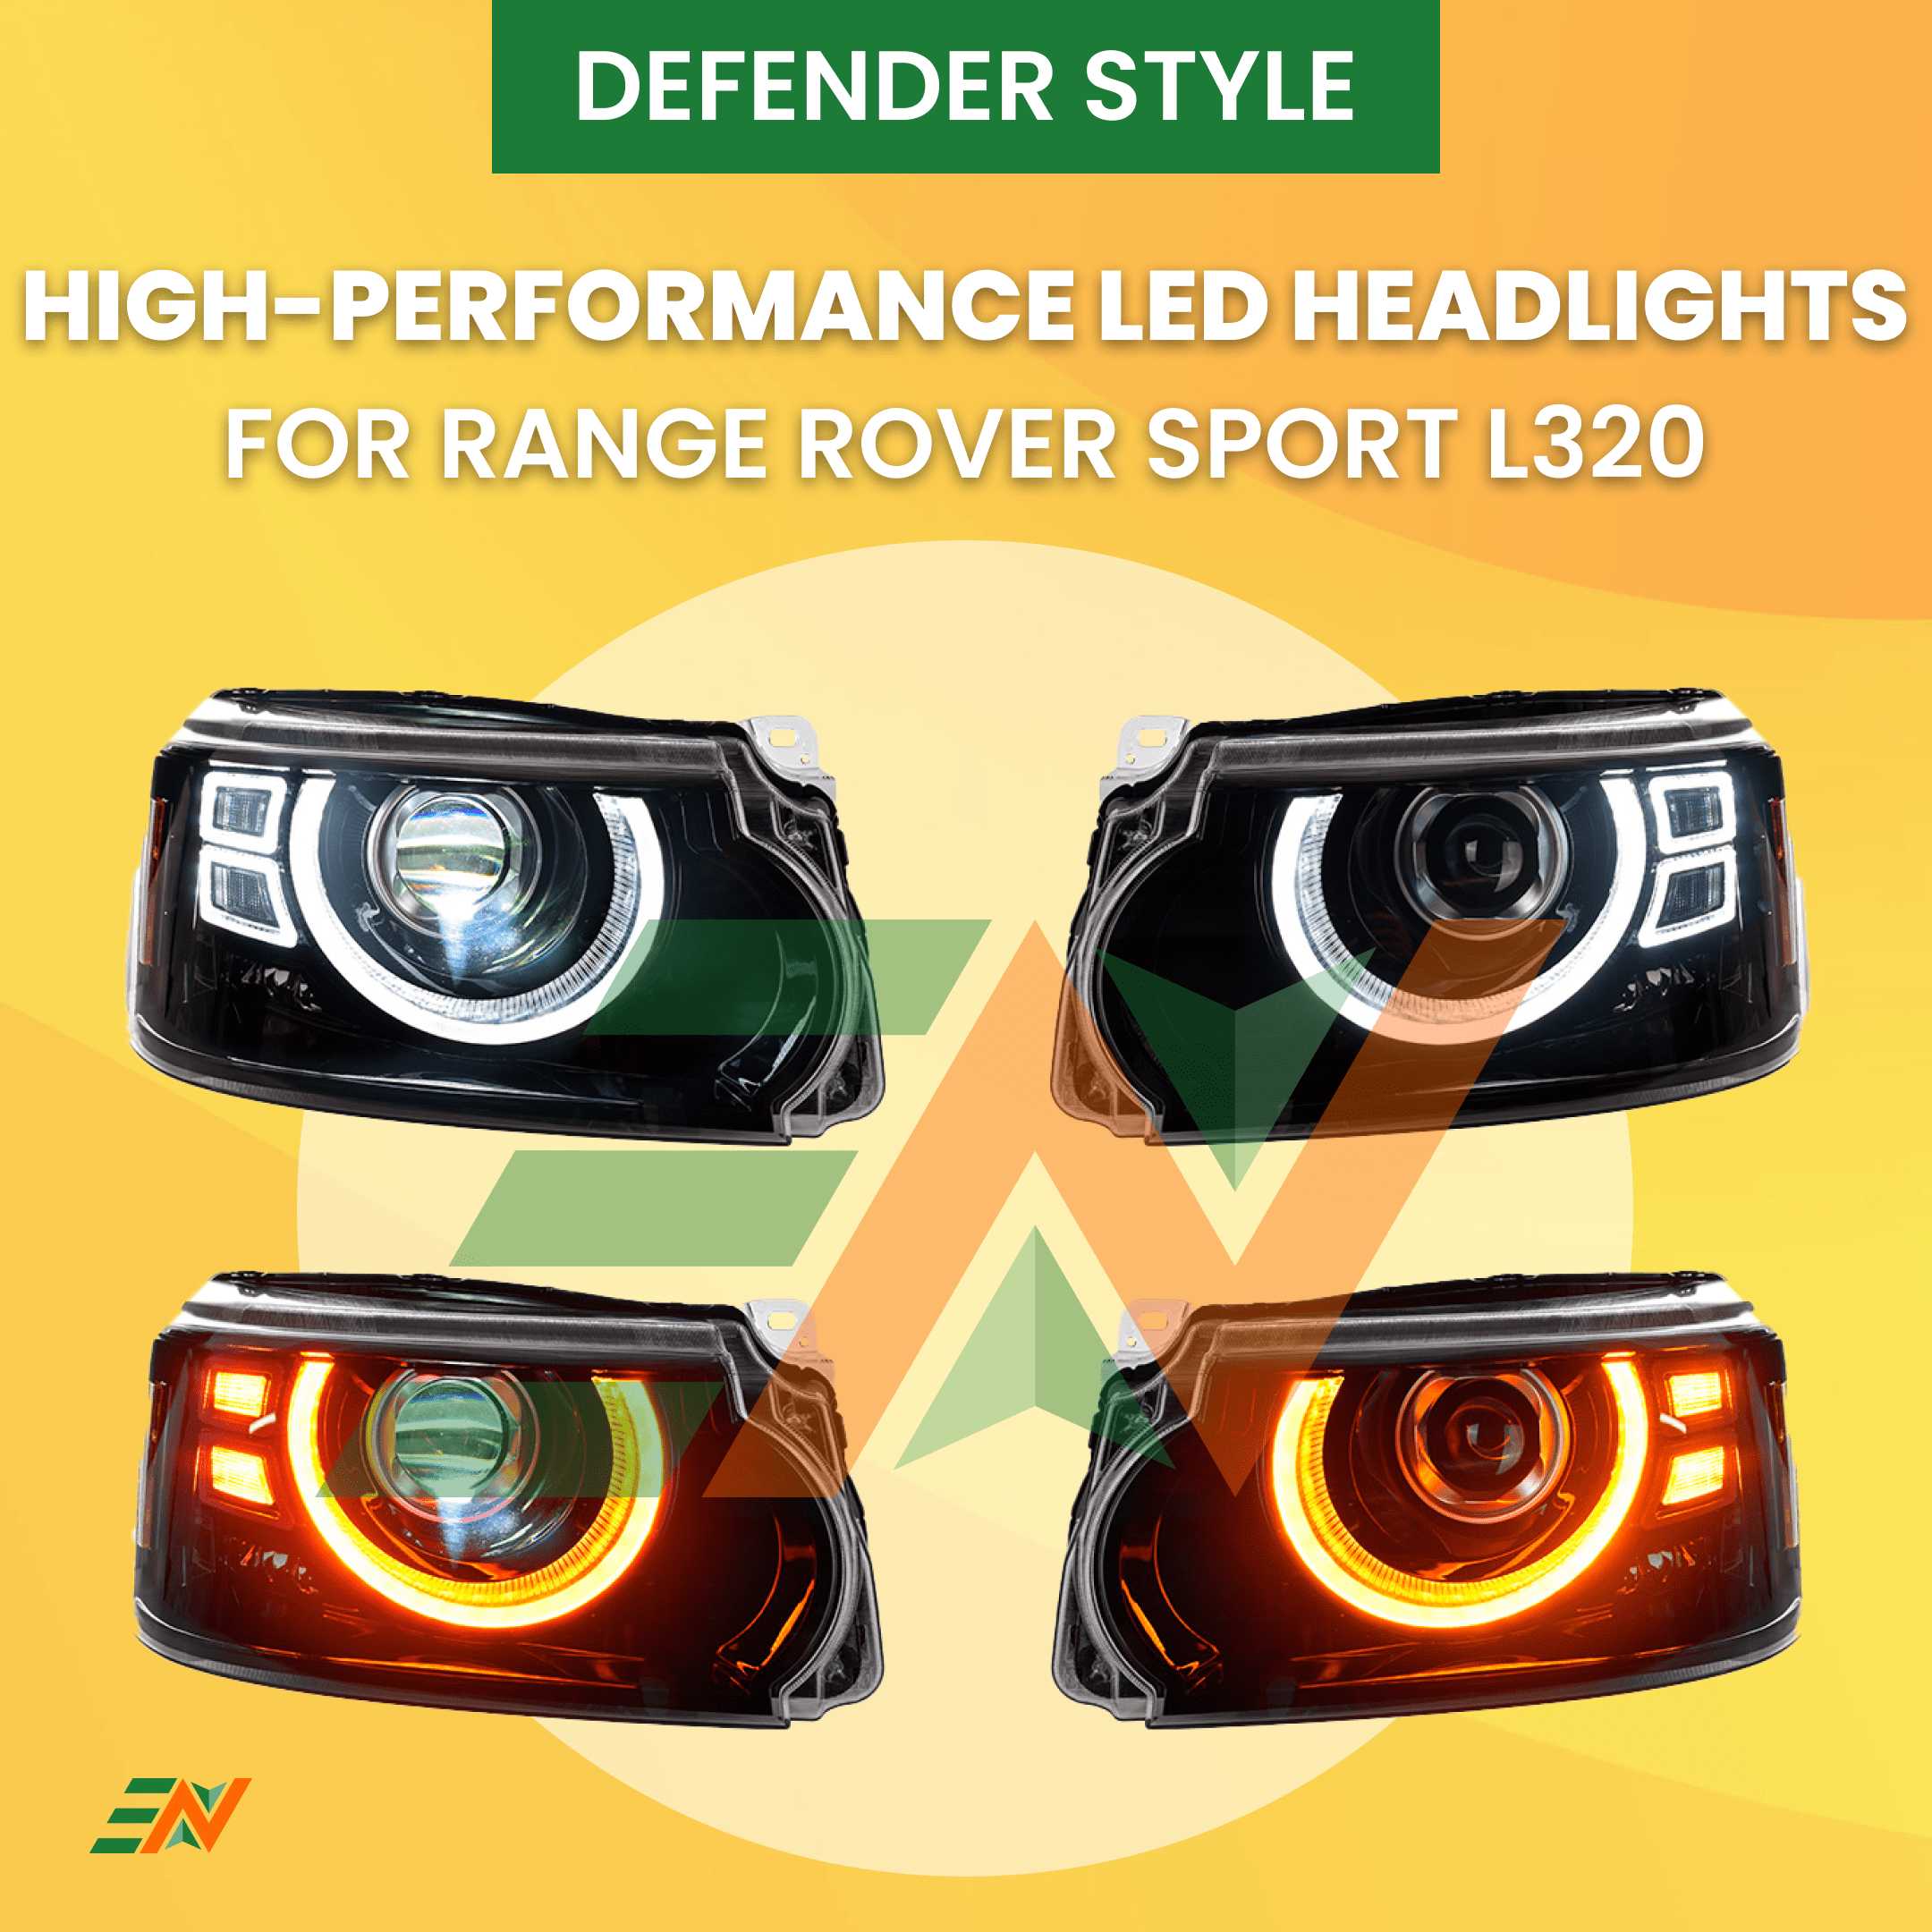 Modified Defender Pair Facelift Headlights for Range Rover Sport L320